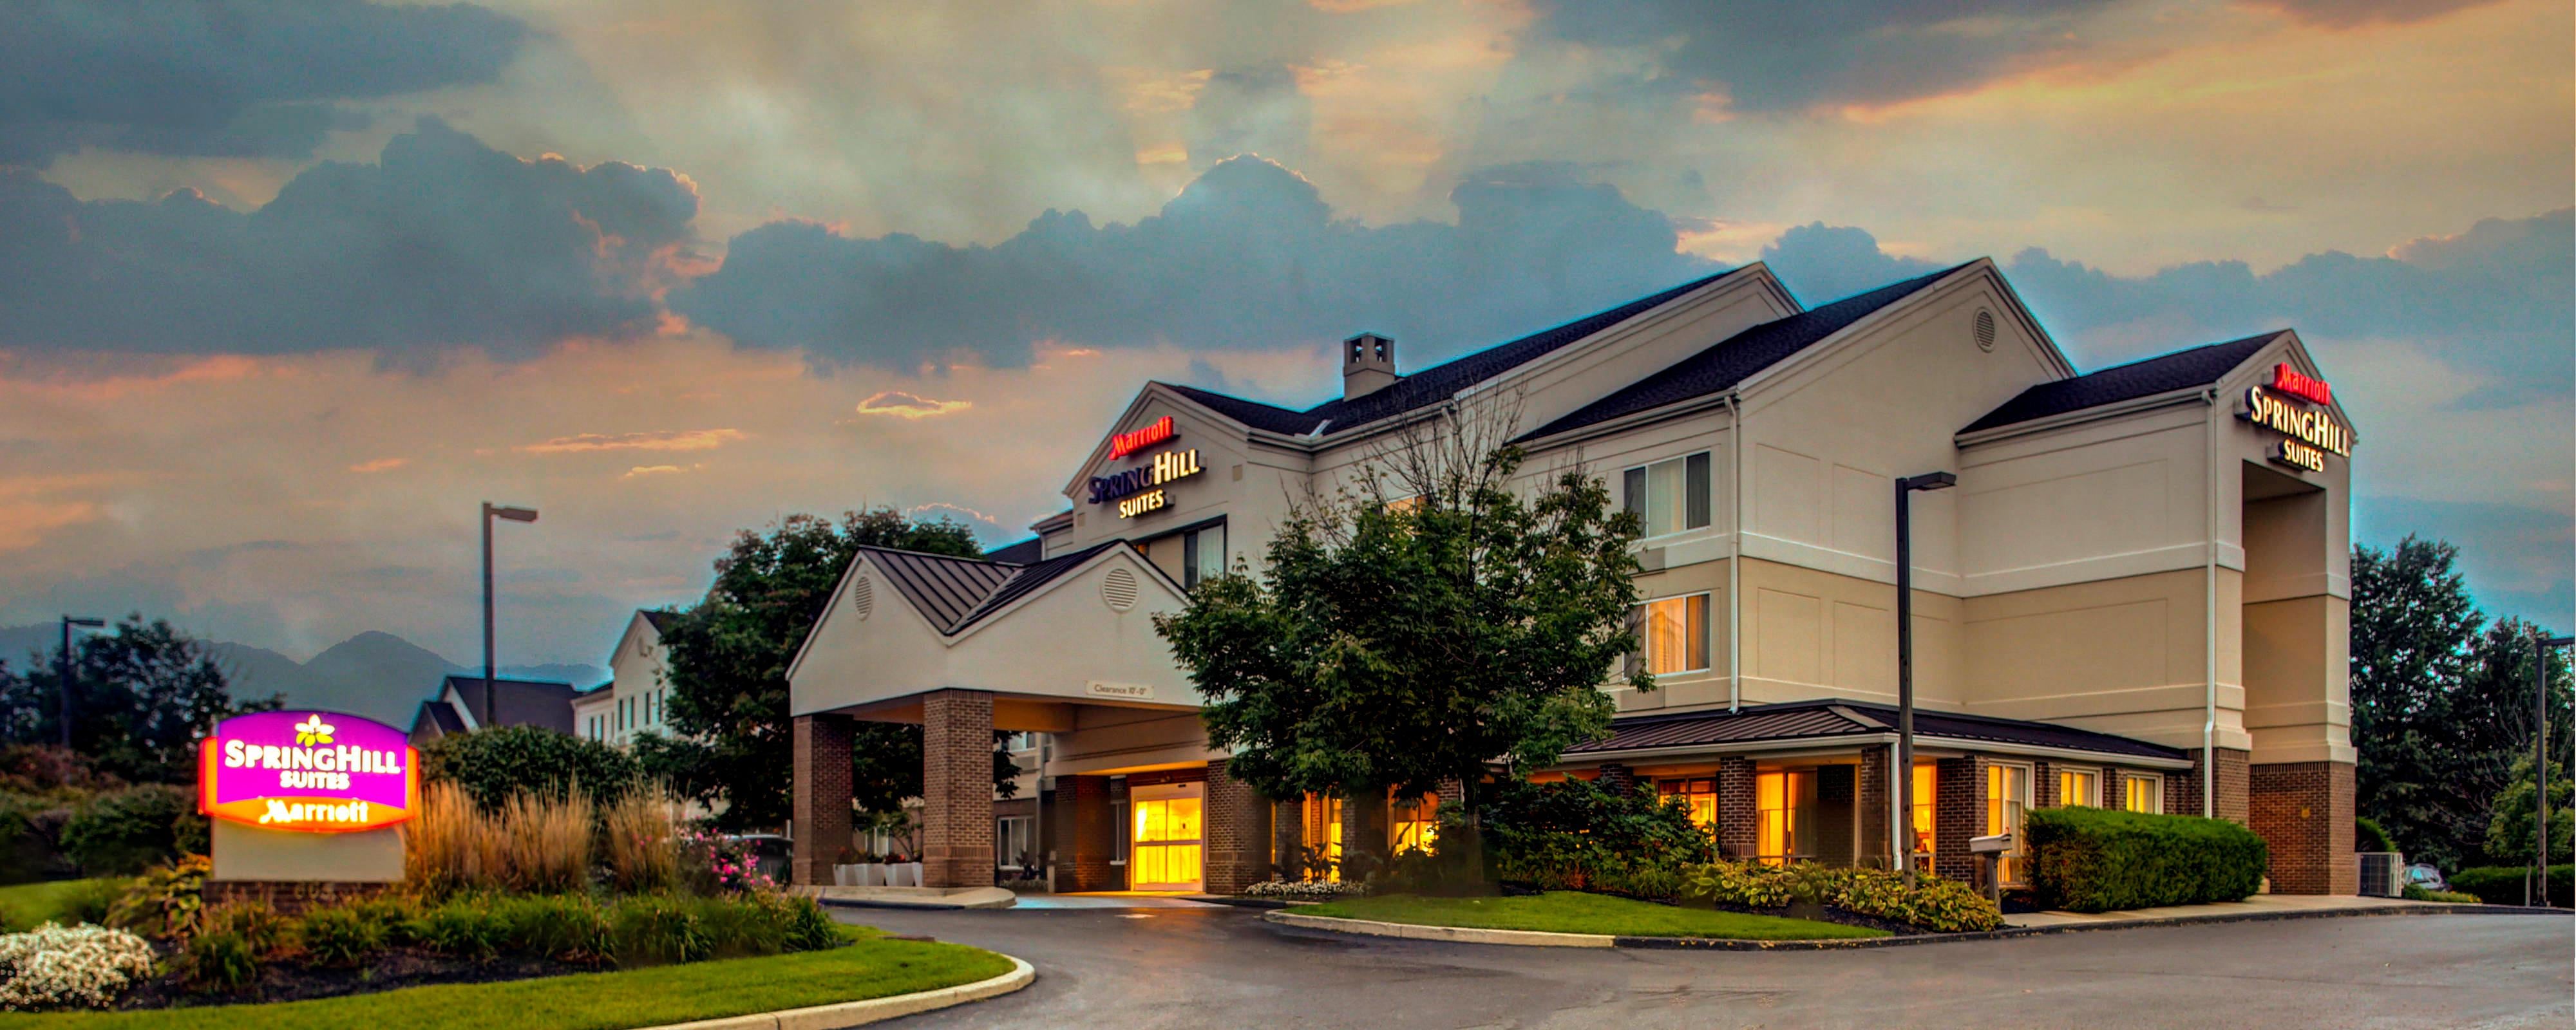 columbus ohio airport hotels with free shuttle